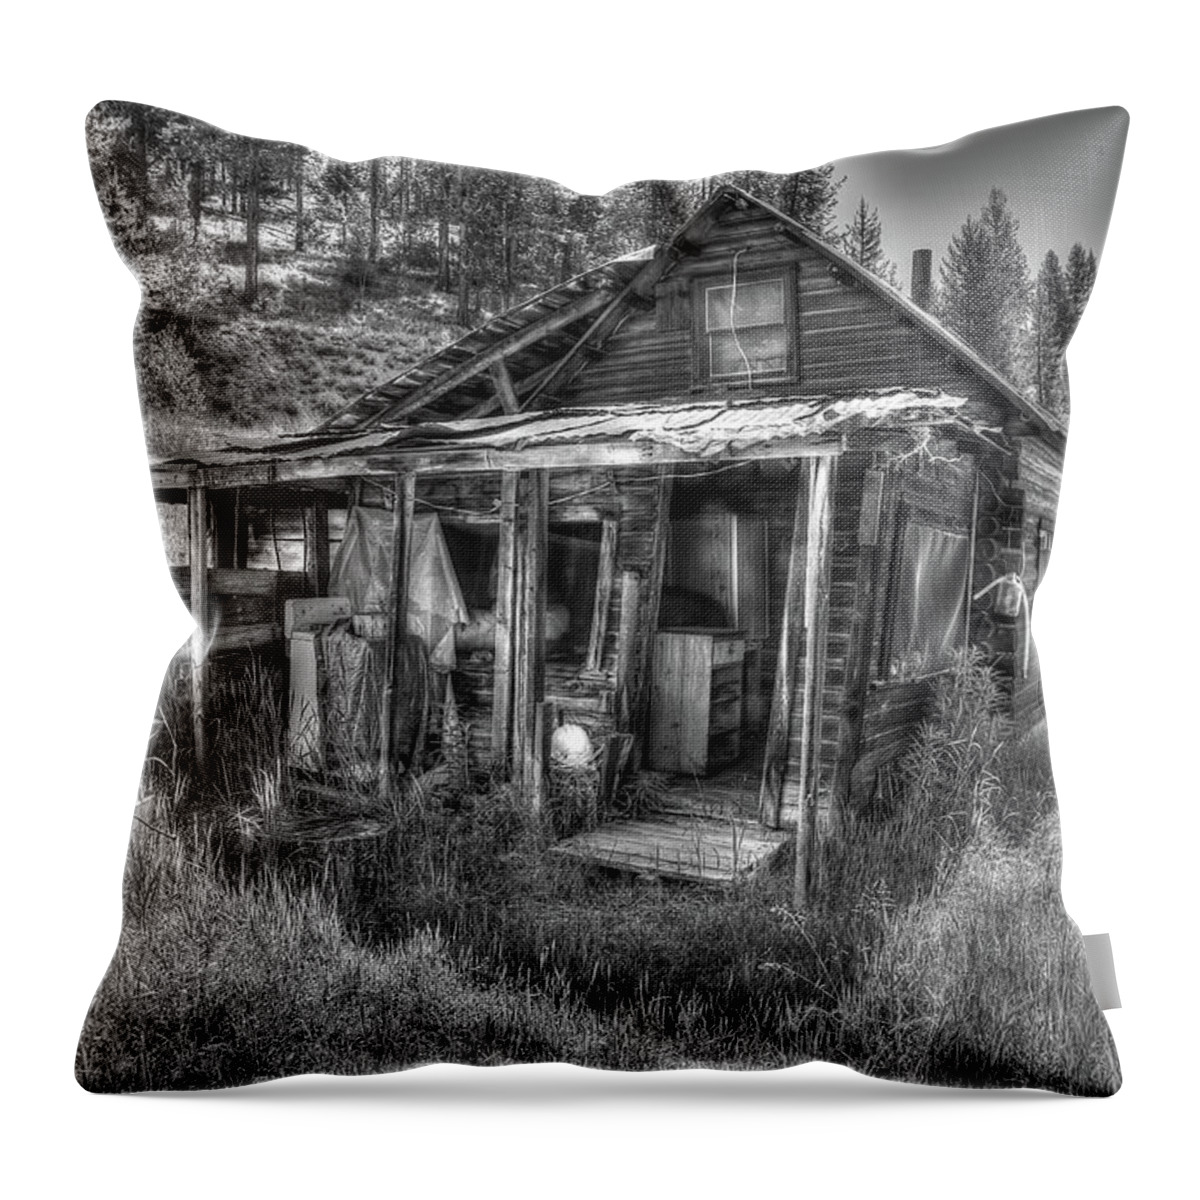 Farm Throw Pillow featuring the photograph The Shanty Home by Richard J Cassato